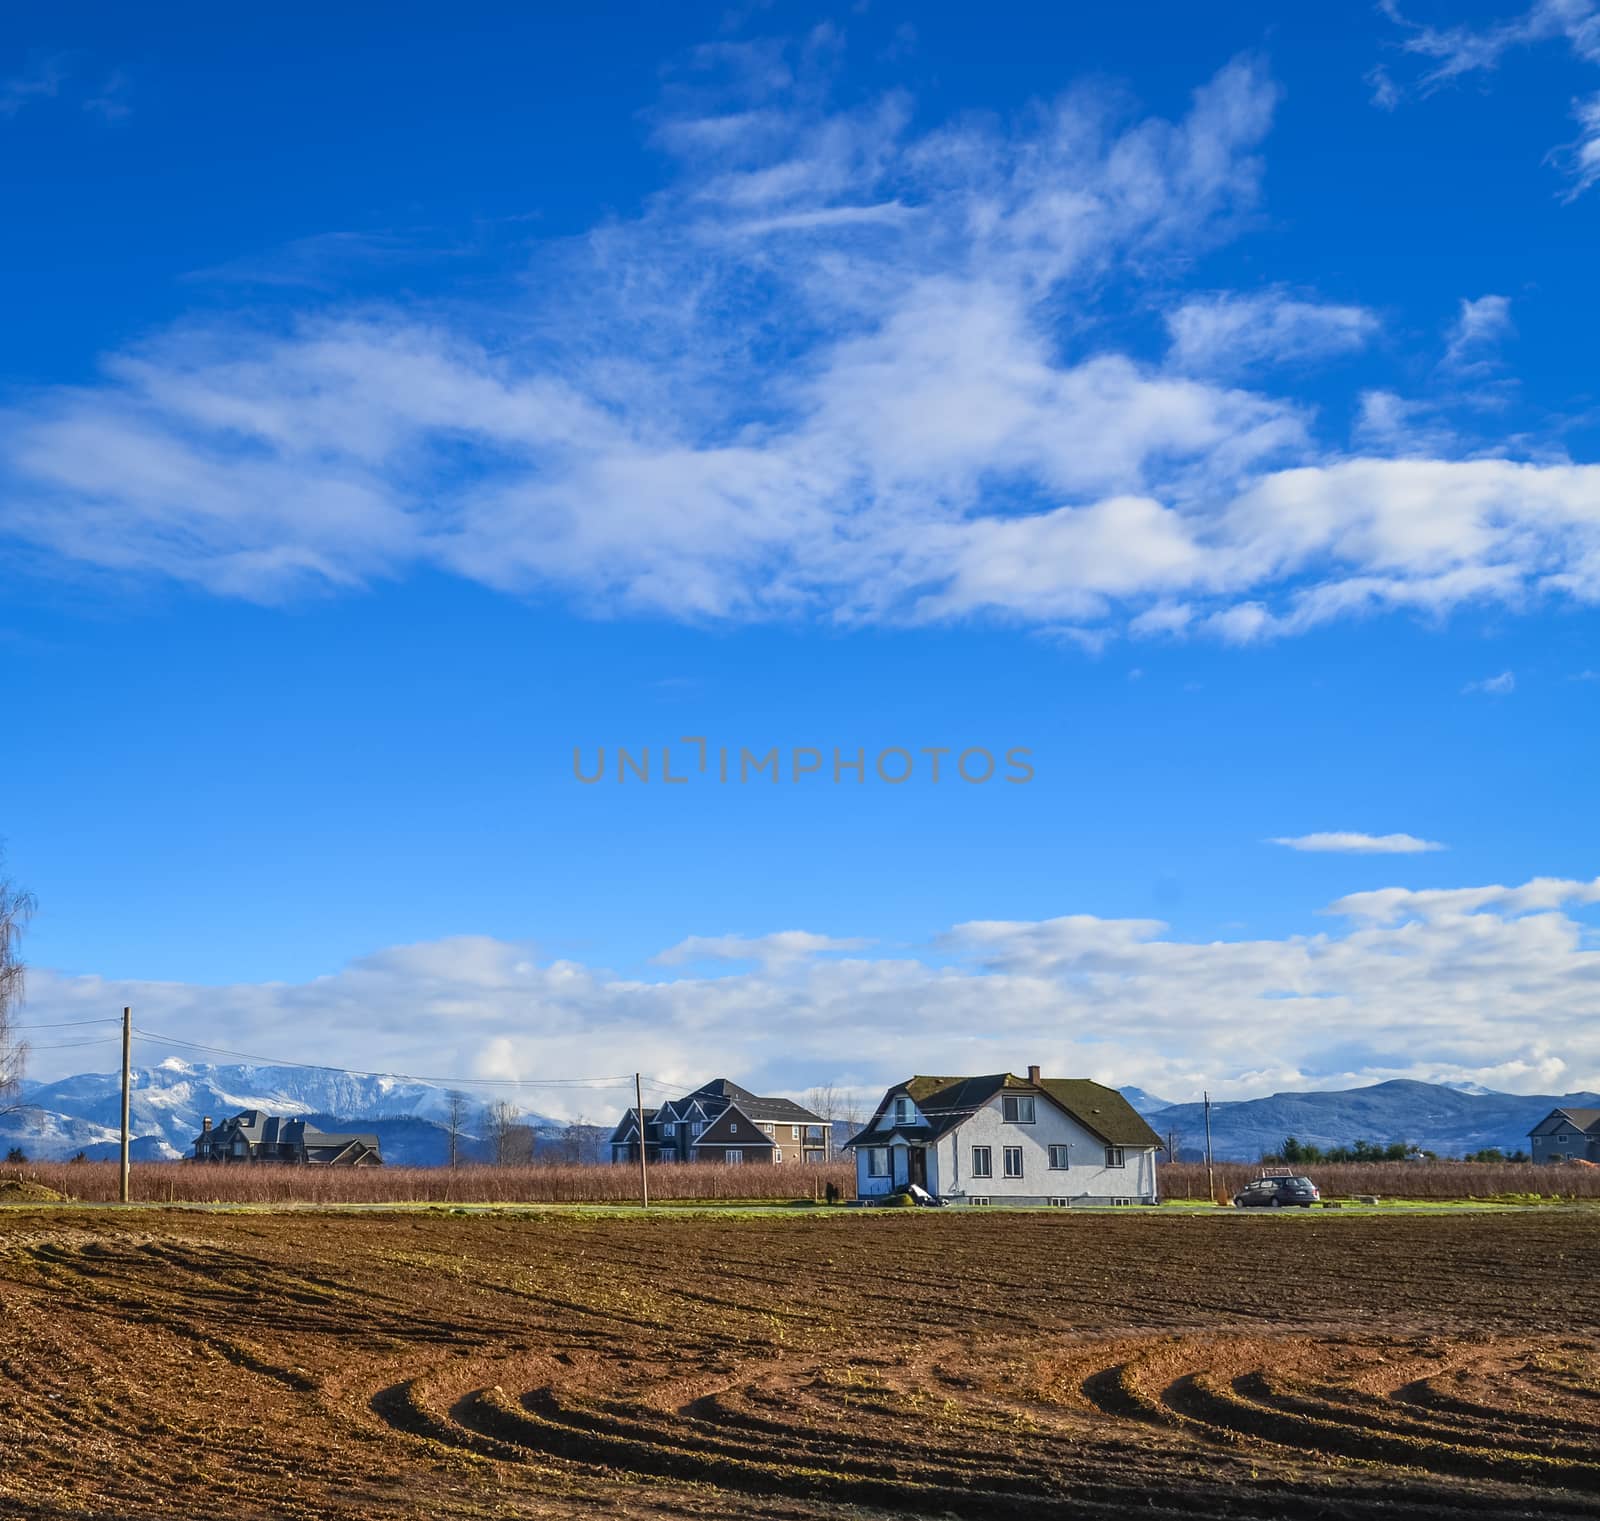 Farmers' houses on the field on winter season in British Columbia by Imagenet